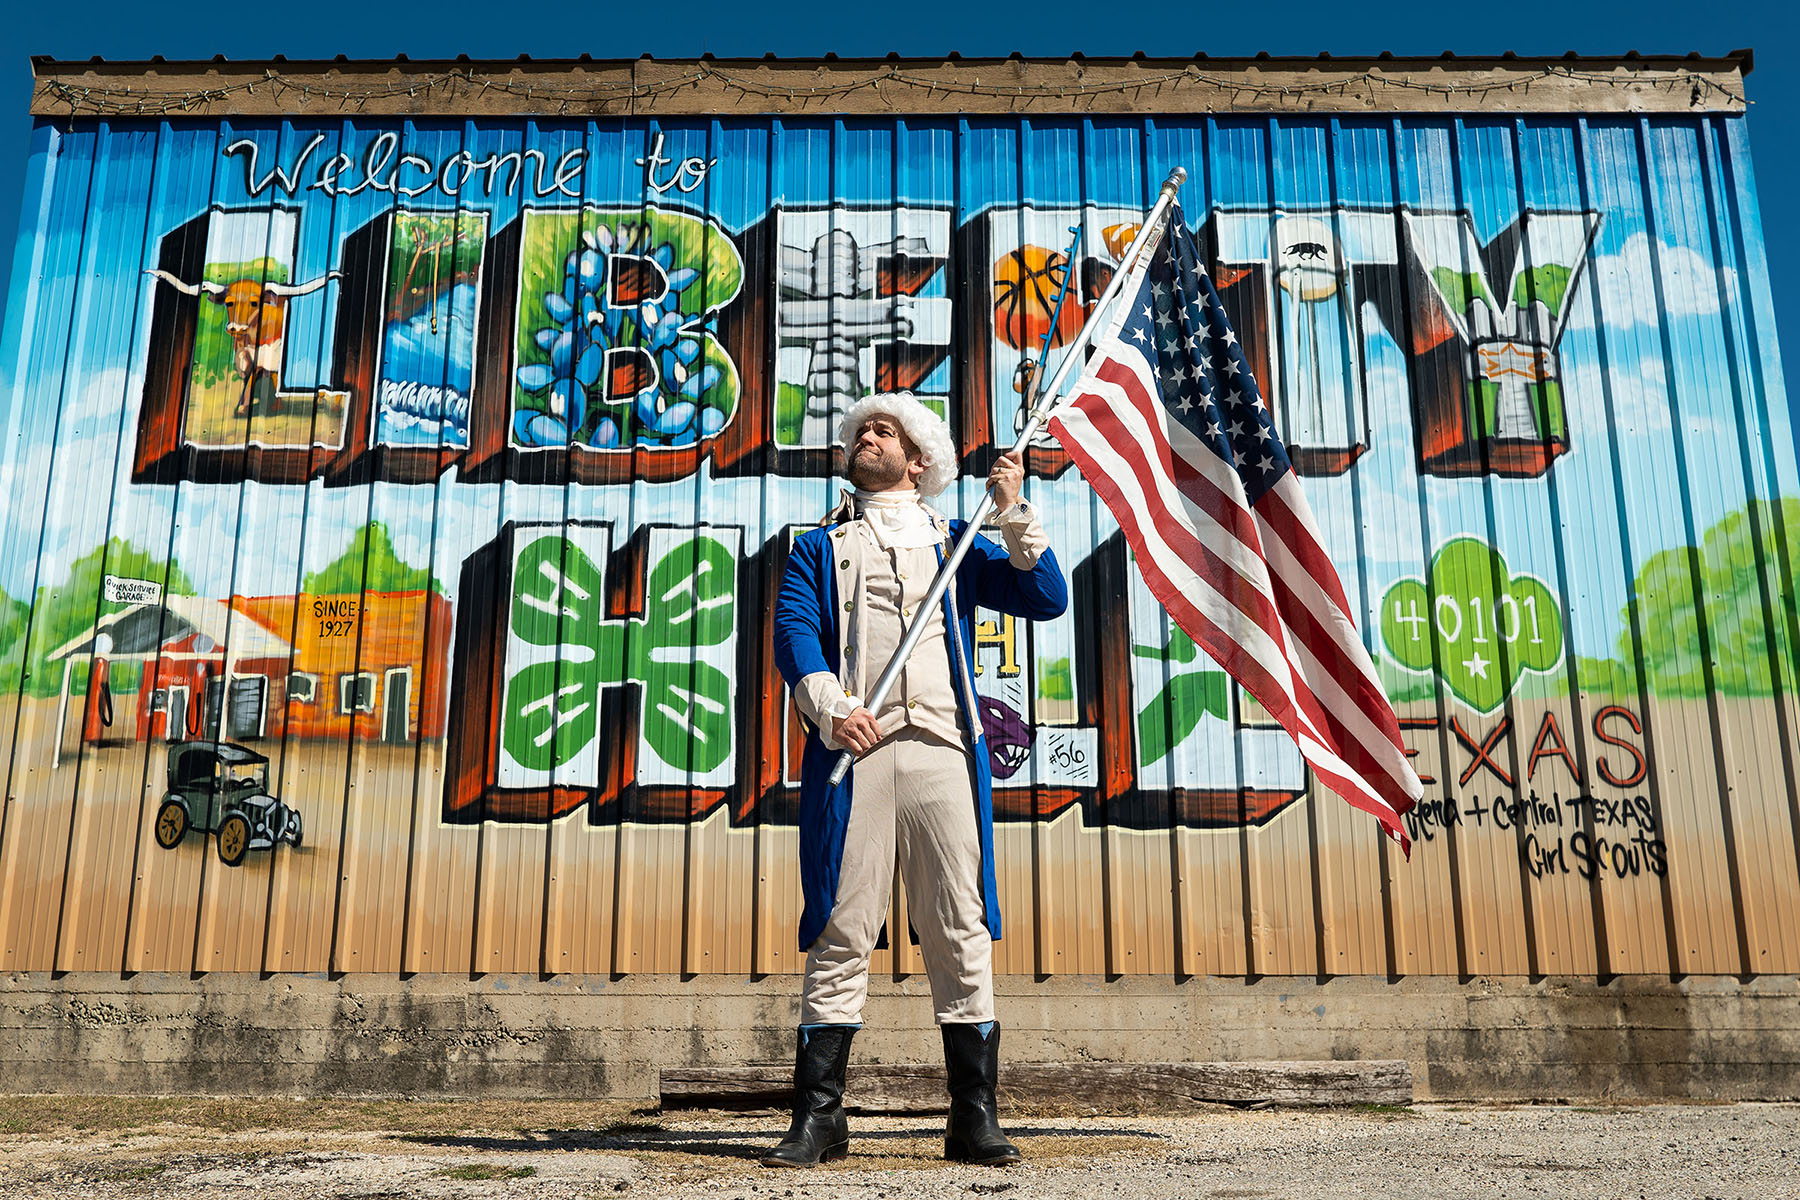 A man wearing traditional Colonial clothes stands holding an American flag in front of a mural reading "Liberty Hill"